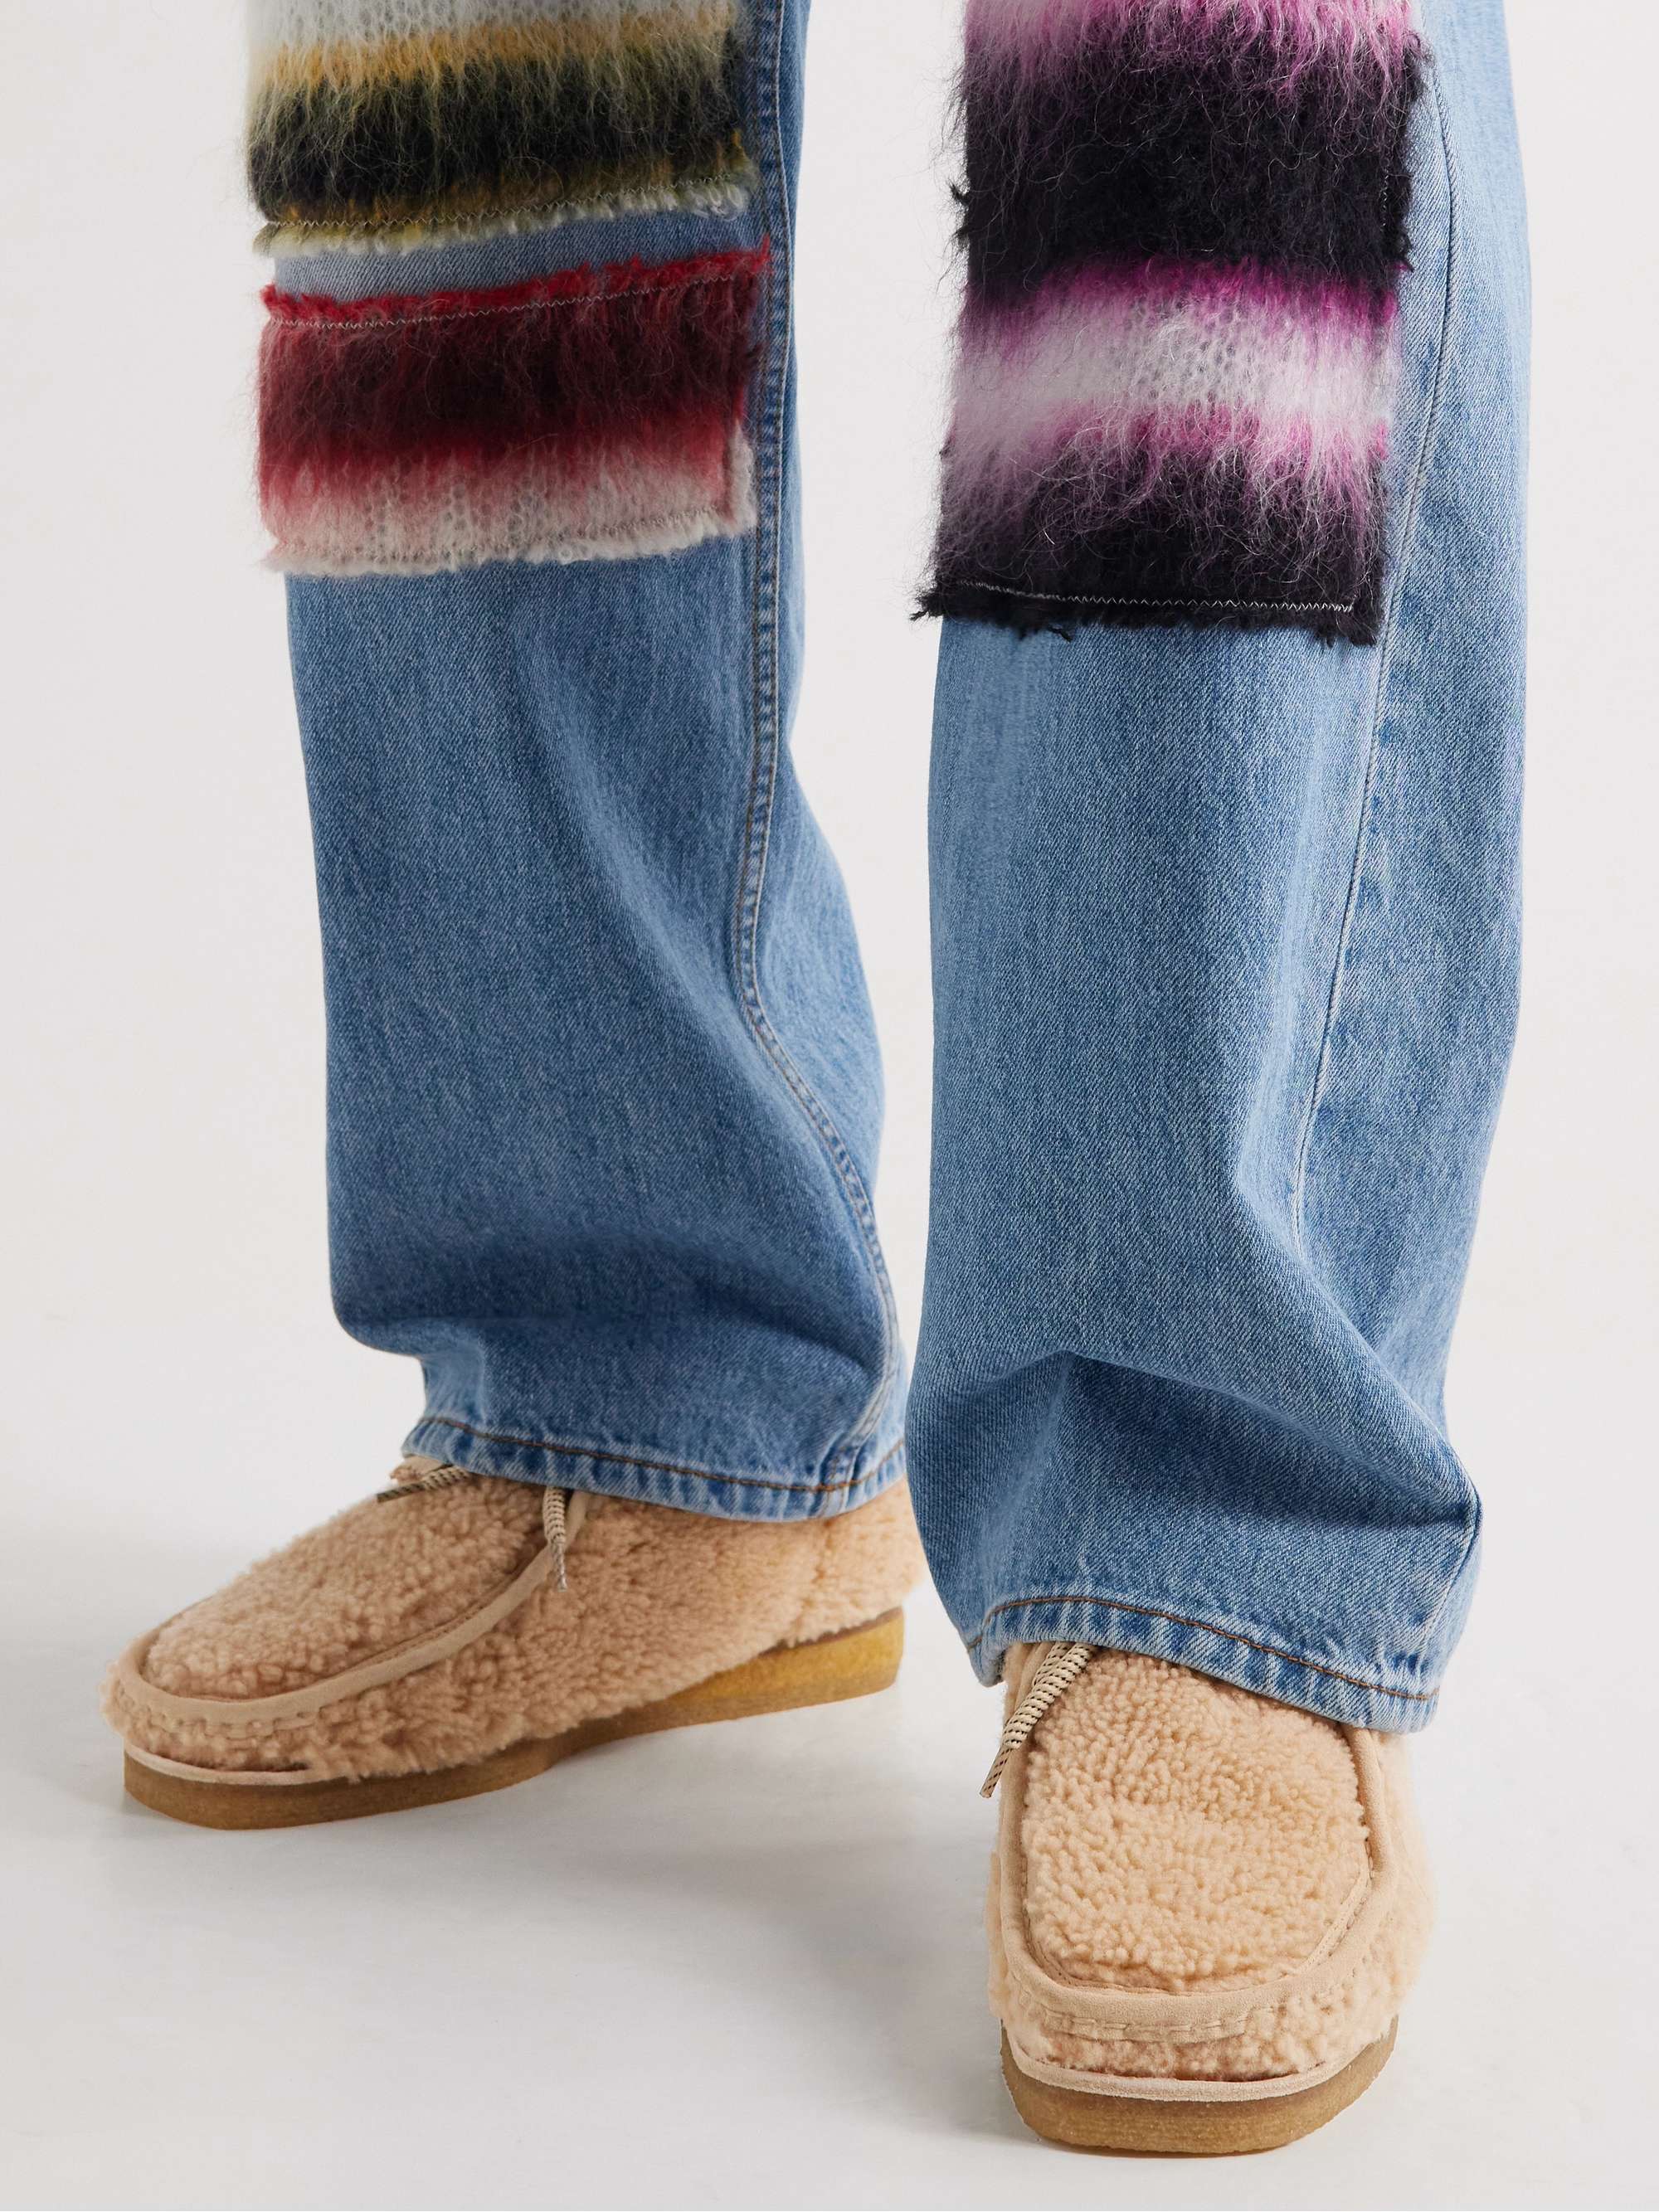 MONCLER GENIUS + Clarks 2 Moncler 1952 Wallabee Suede-Trimmed Faux Shearling Chukka Boots